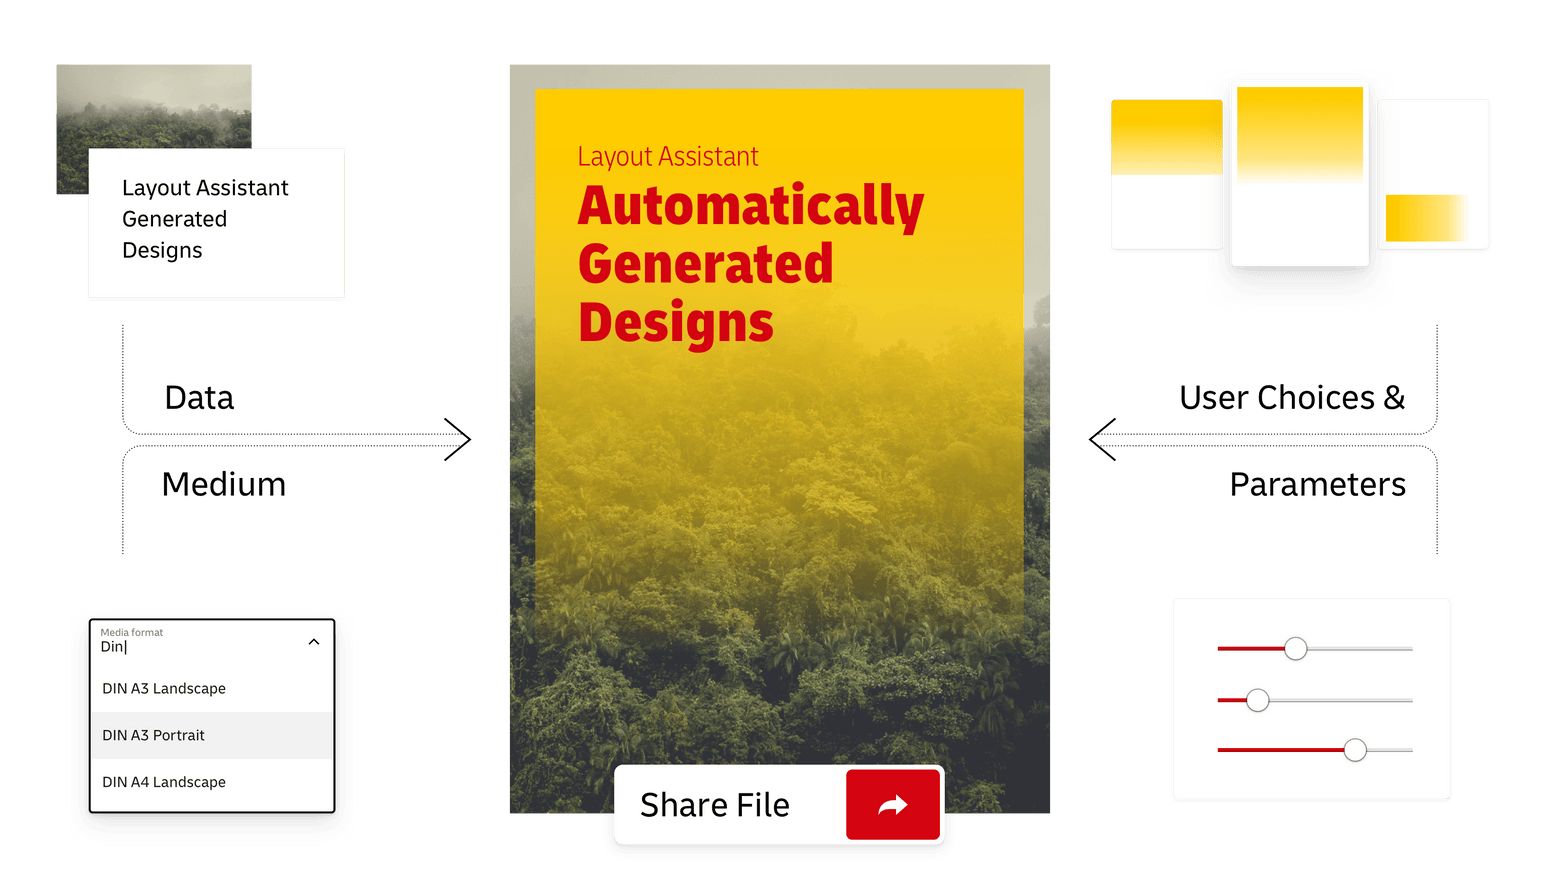 Layout Assistant — Automatically generated designs based on user input and smart algorithms.